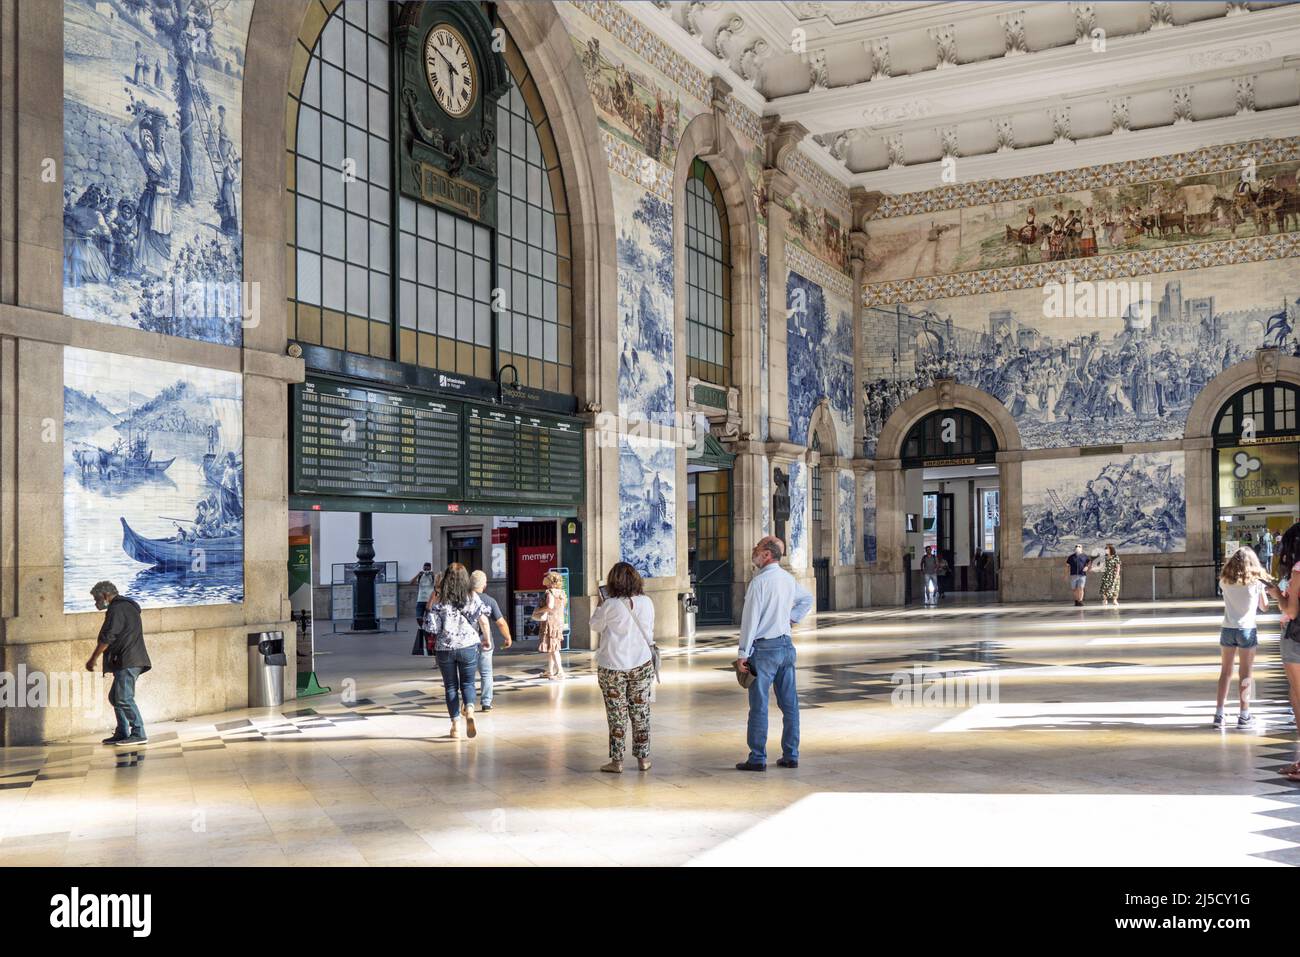 Portugal, Porto, 20.07.2020. Mosaics in Porto Sao Bento train station on 20.07.2020. Porto Sao Bento train station is an inner-city train station in the northern Portuguese city of Porto. The station was designed by the architect José Marques da Silva, for the vestibule designed with numerous azulejos was the painter Jorge Colaco responsible. [automated translation] Stock Photo